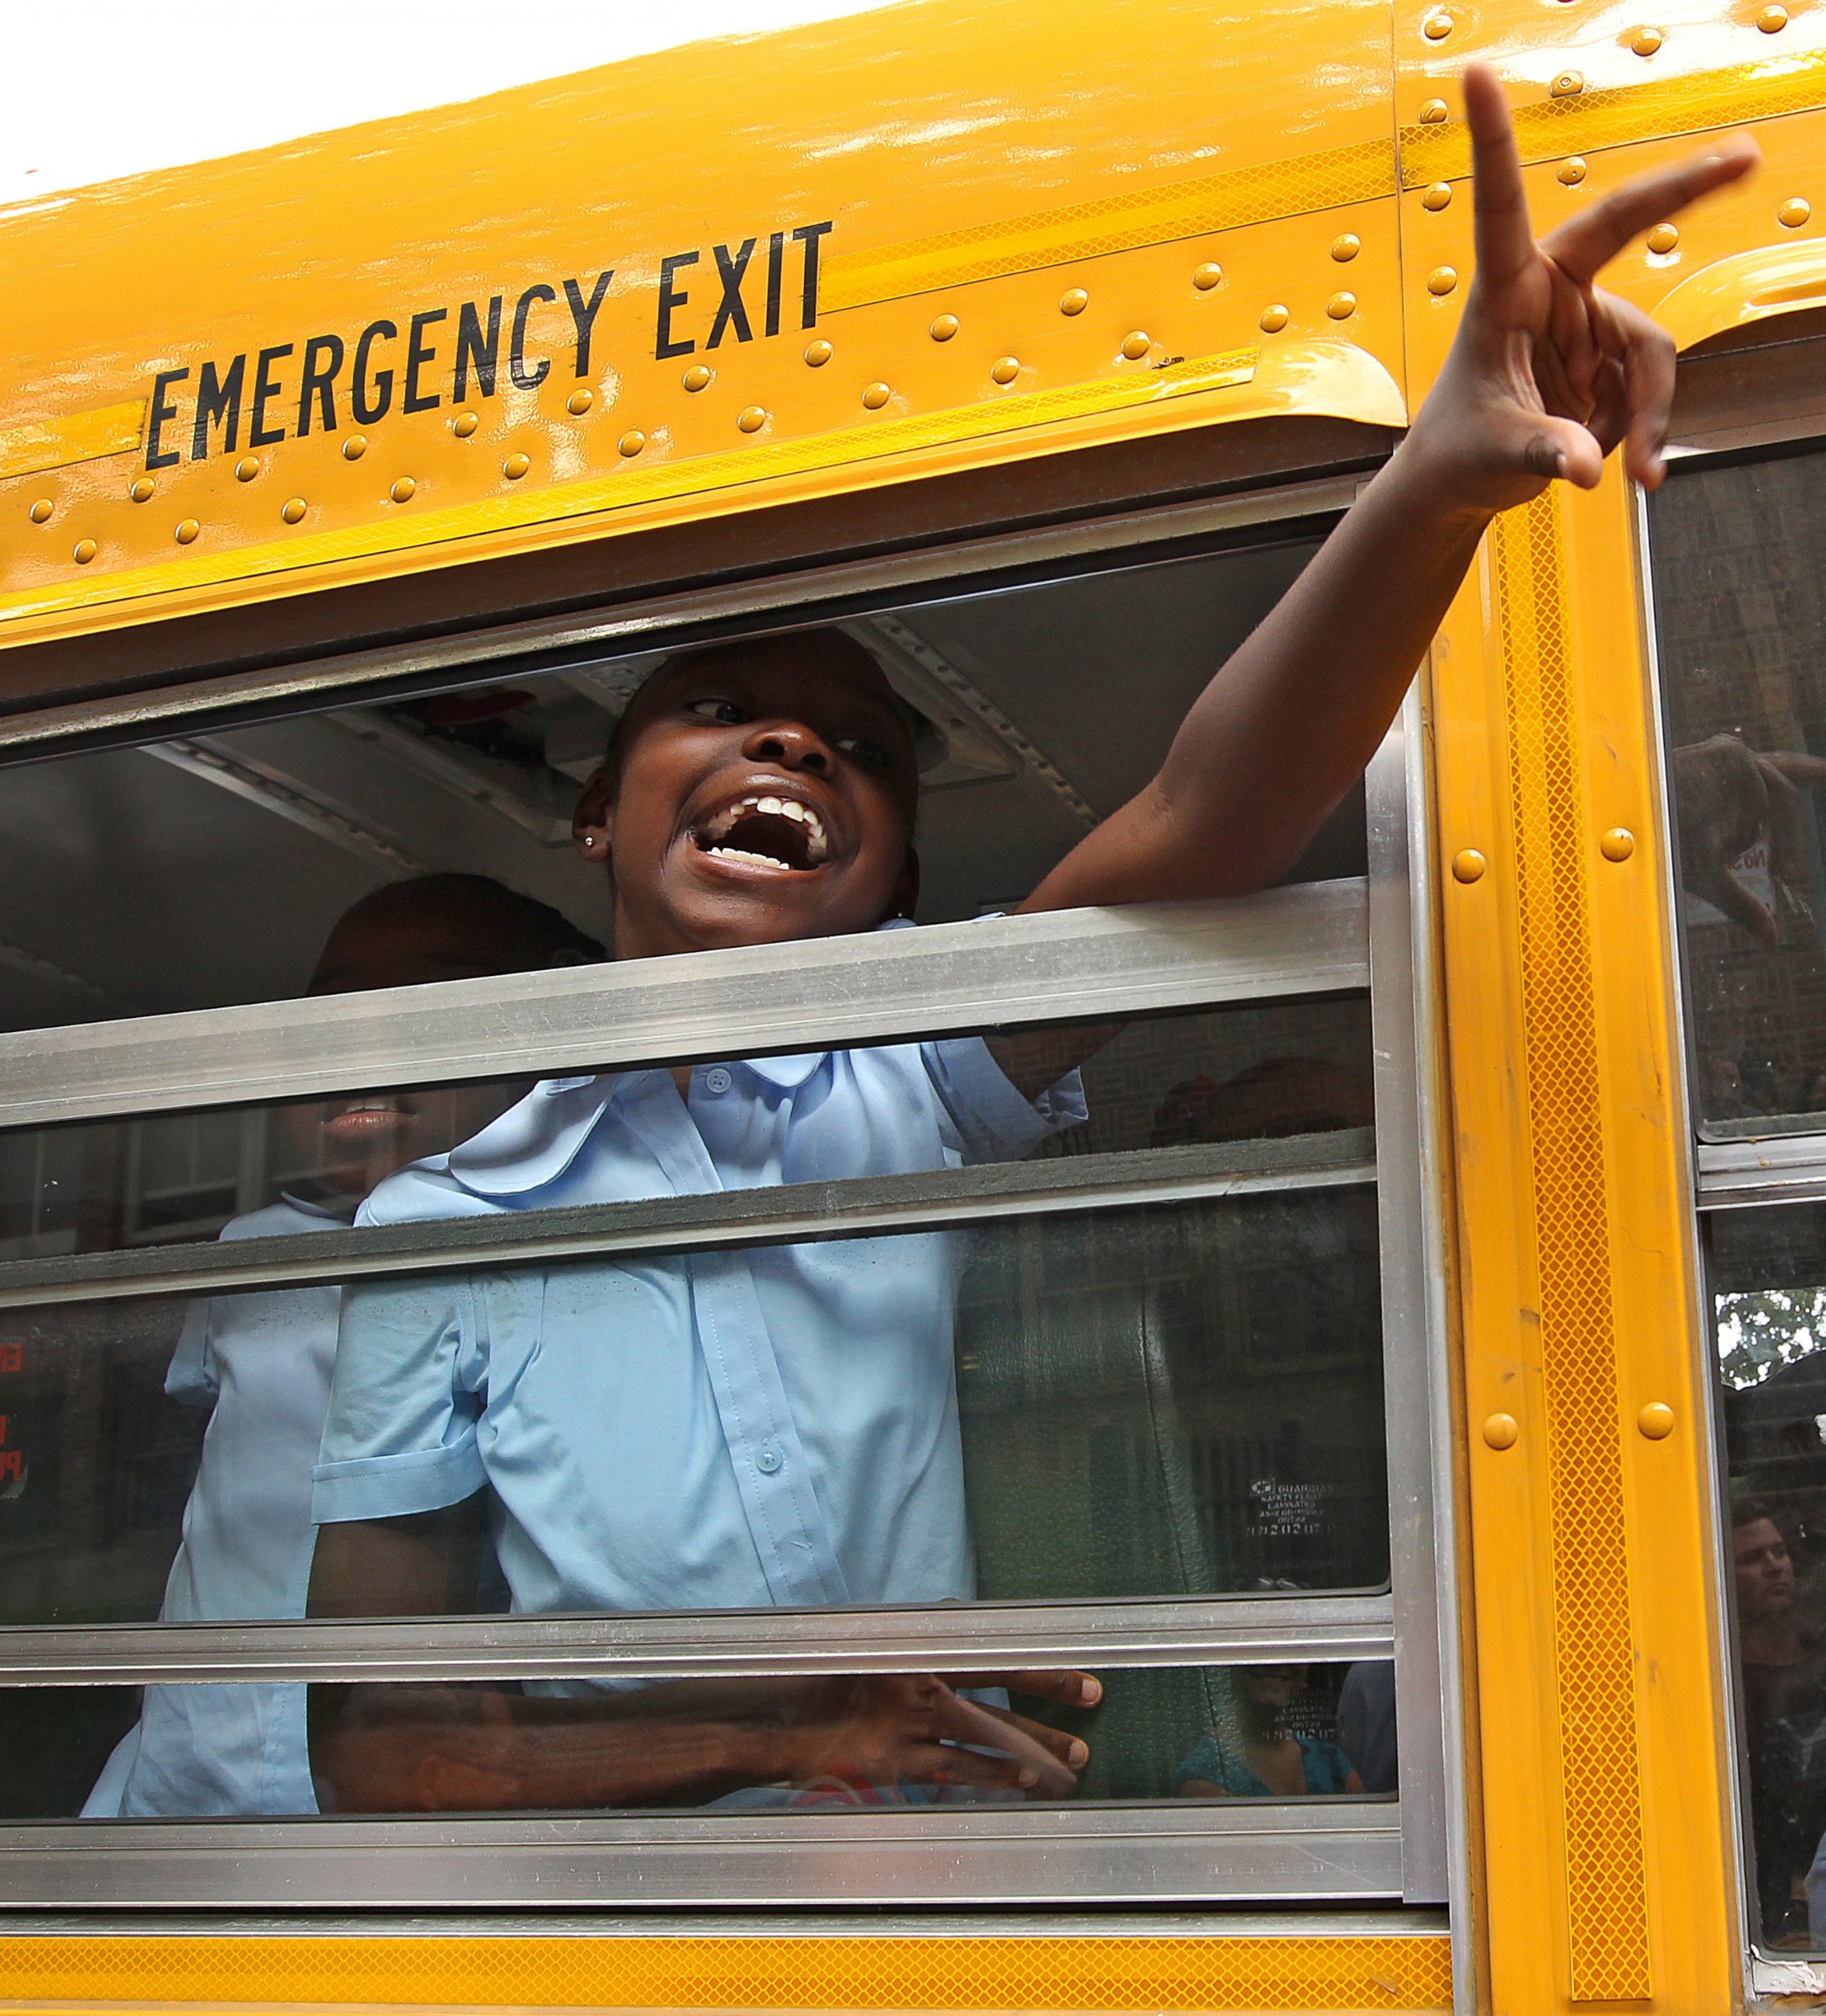 PHOTO: A third grade student arrives by bus on the first day of school at Ellis Elementary in Boston, Mass. on Sept. 5, 2012.